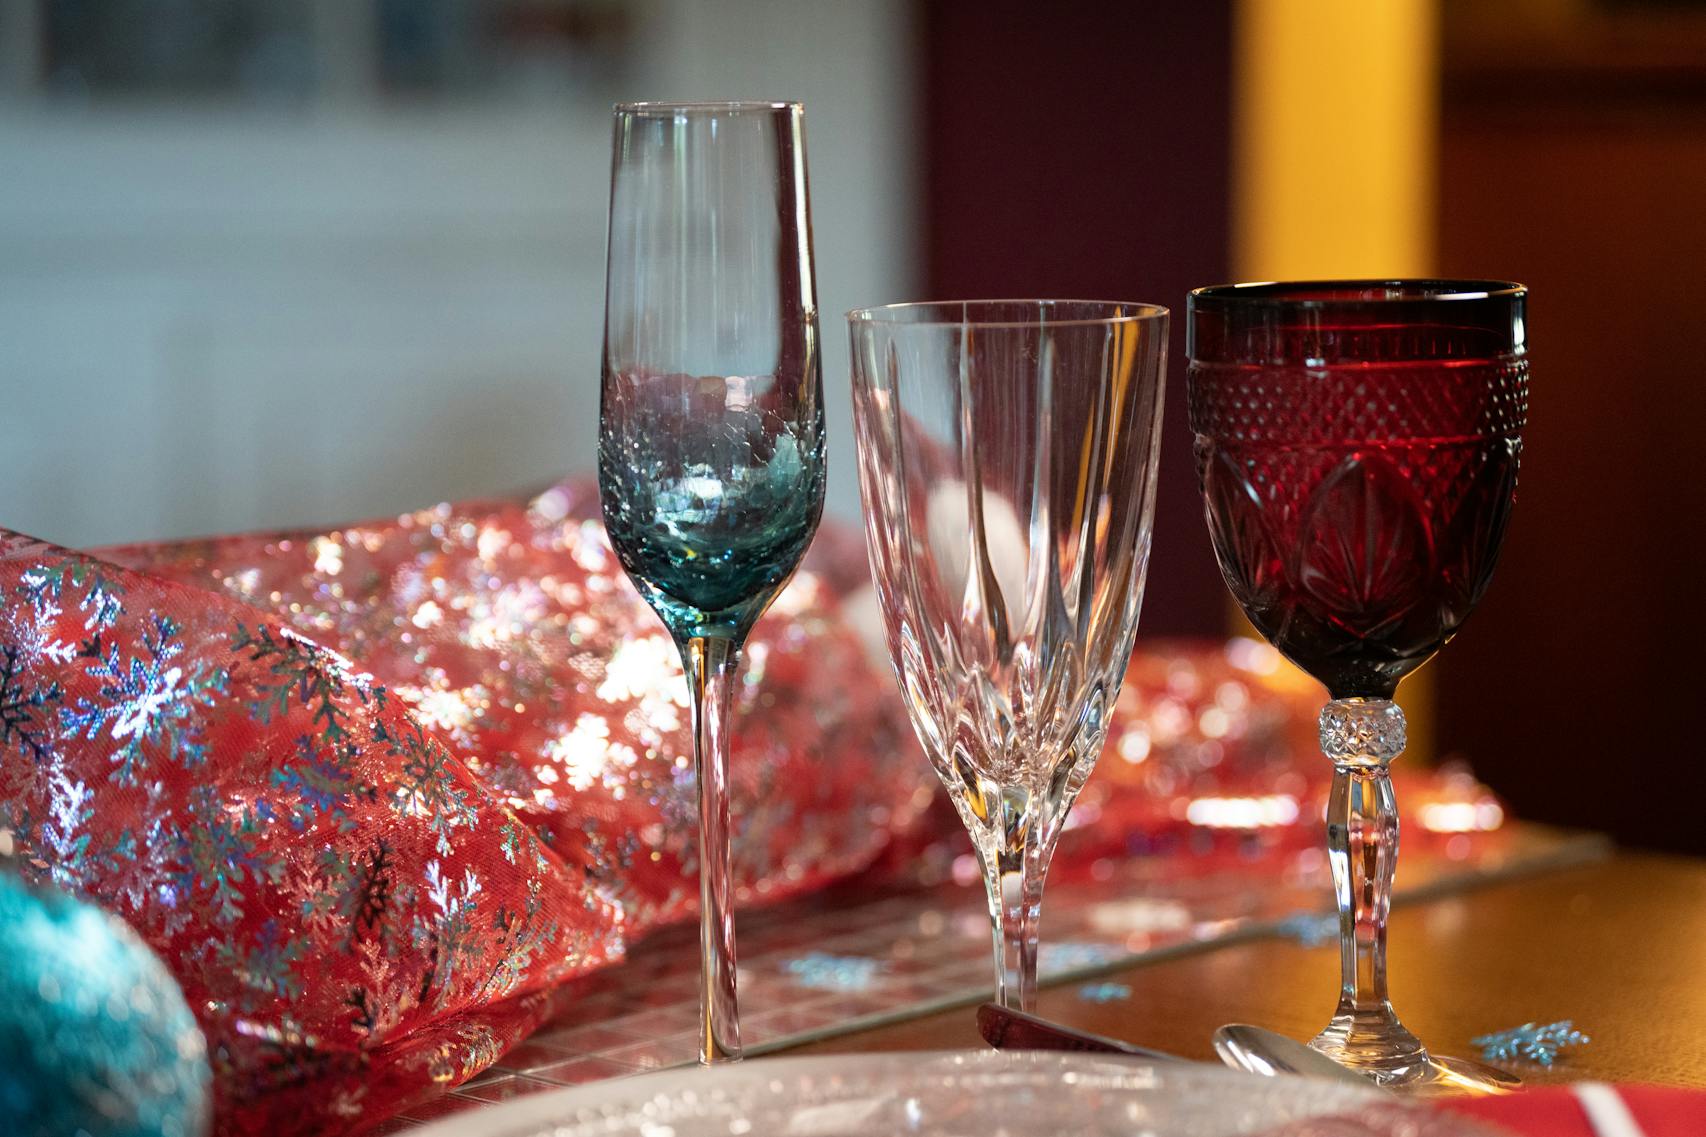 A combination of three glasses at each place setting on a holiday tablescape by Amy Leyden of Kaleidoscope Table Setting.